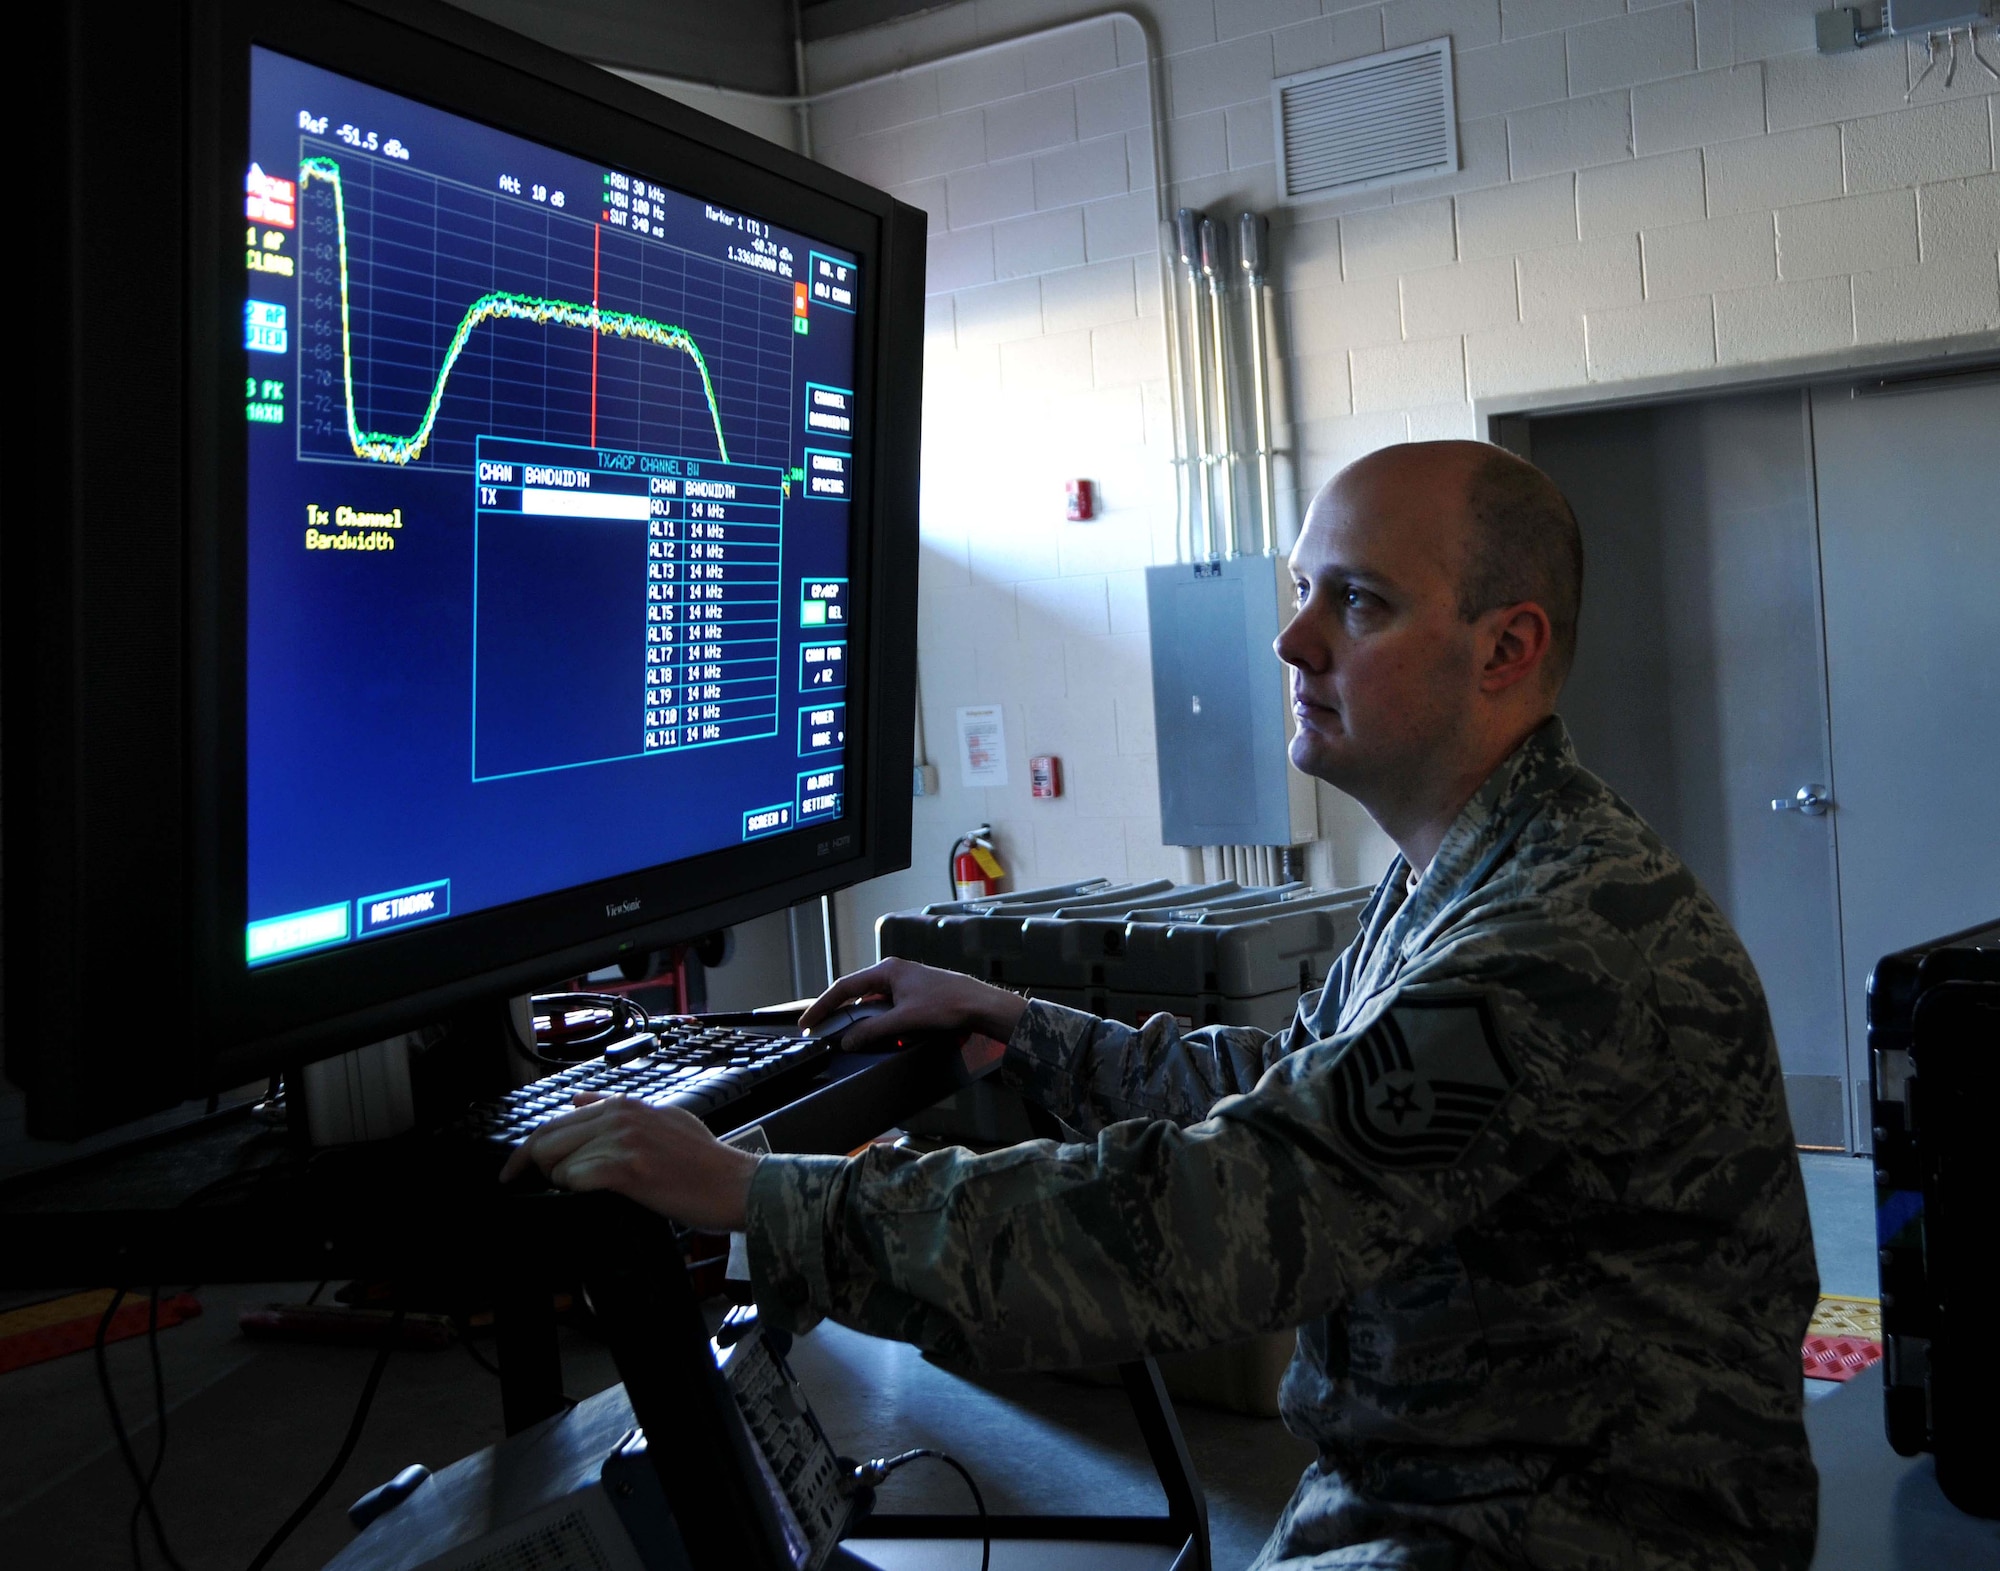 U.S. Air Force Master Sgt. Carl Champagne, a telecommunications specialist for the 263rd Combat Communication Squadron, disrupts adversary’s communications by using spectrum monitoring tools during a simulated satellite communications electronic attack exercise. 263rd CBCS hosted more than 50 active duty, reserve and National Guard airmen during this joint training exercise held at the North Carolina Air National Guard base, Combat Operations Group, New London, N.C. Together they supported nearly 37,000 Sailors, Marines and Airmen during three U.S. Strategic Command and U.S. Navy exercises. (U.S. Air National Guard photo by Master Sgt. Patricia F. Moran, 145th Public Affairs/Released)
